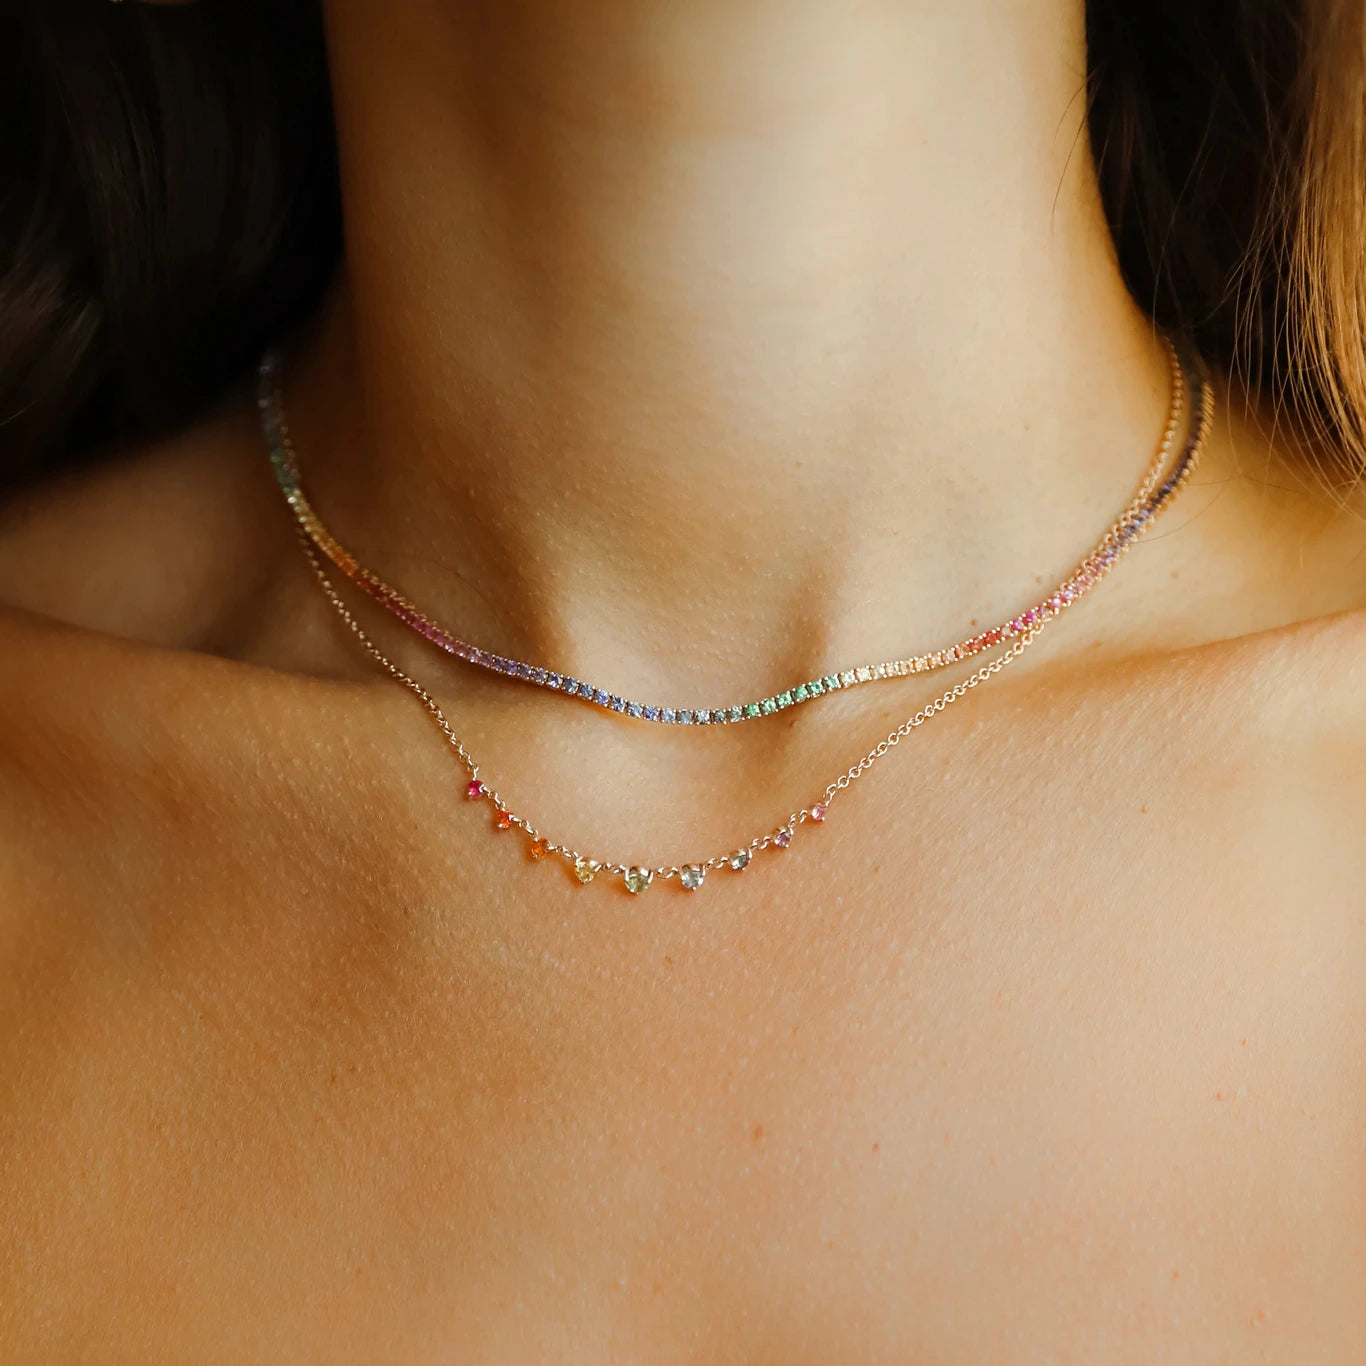 Lover inspired Necklace